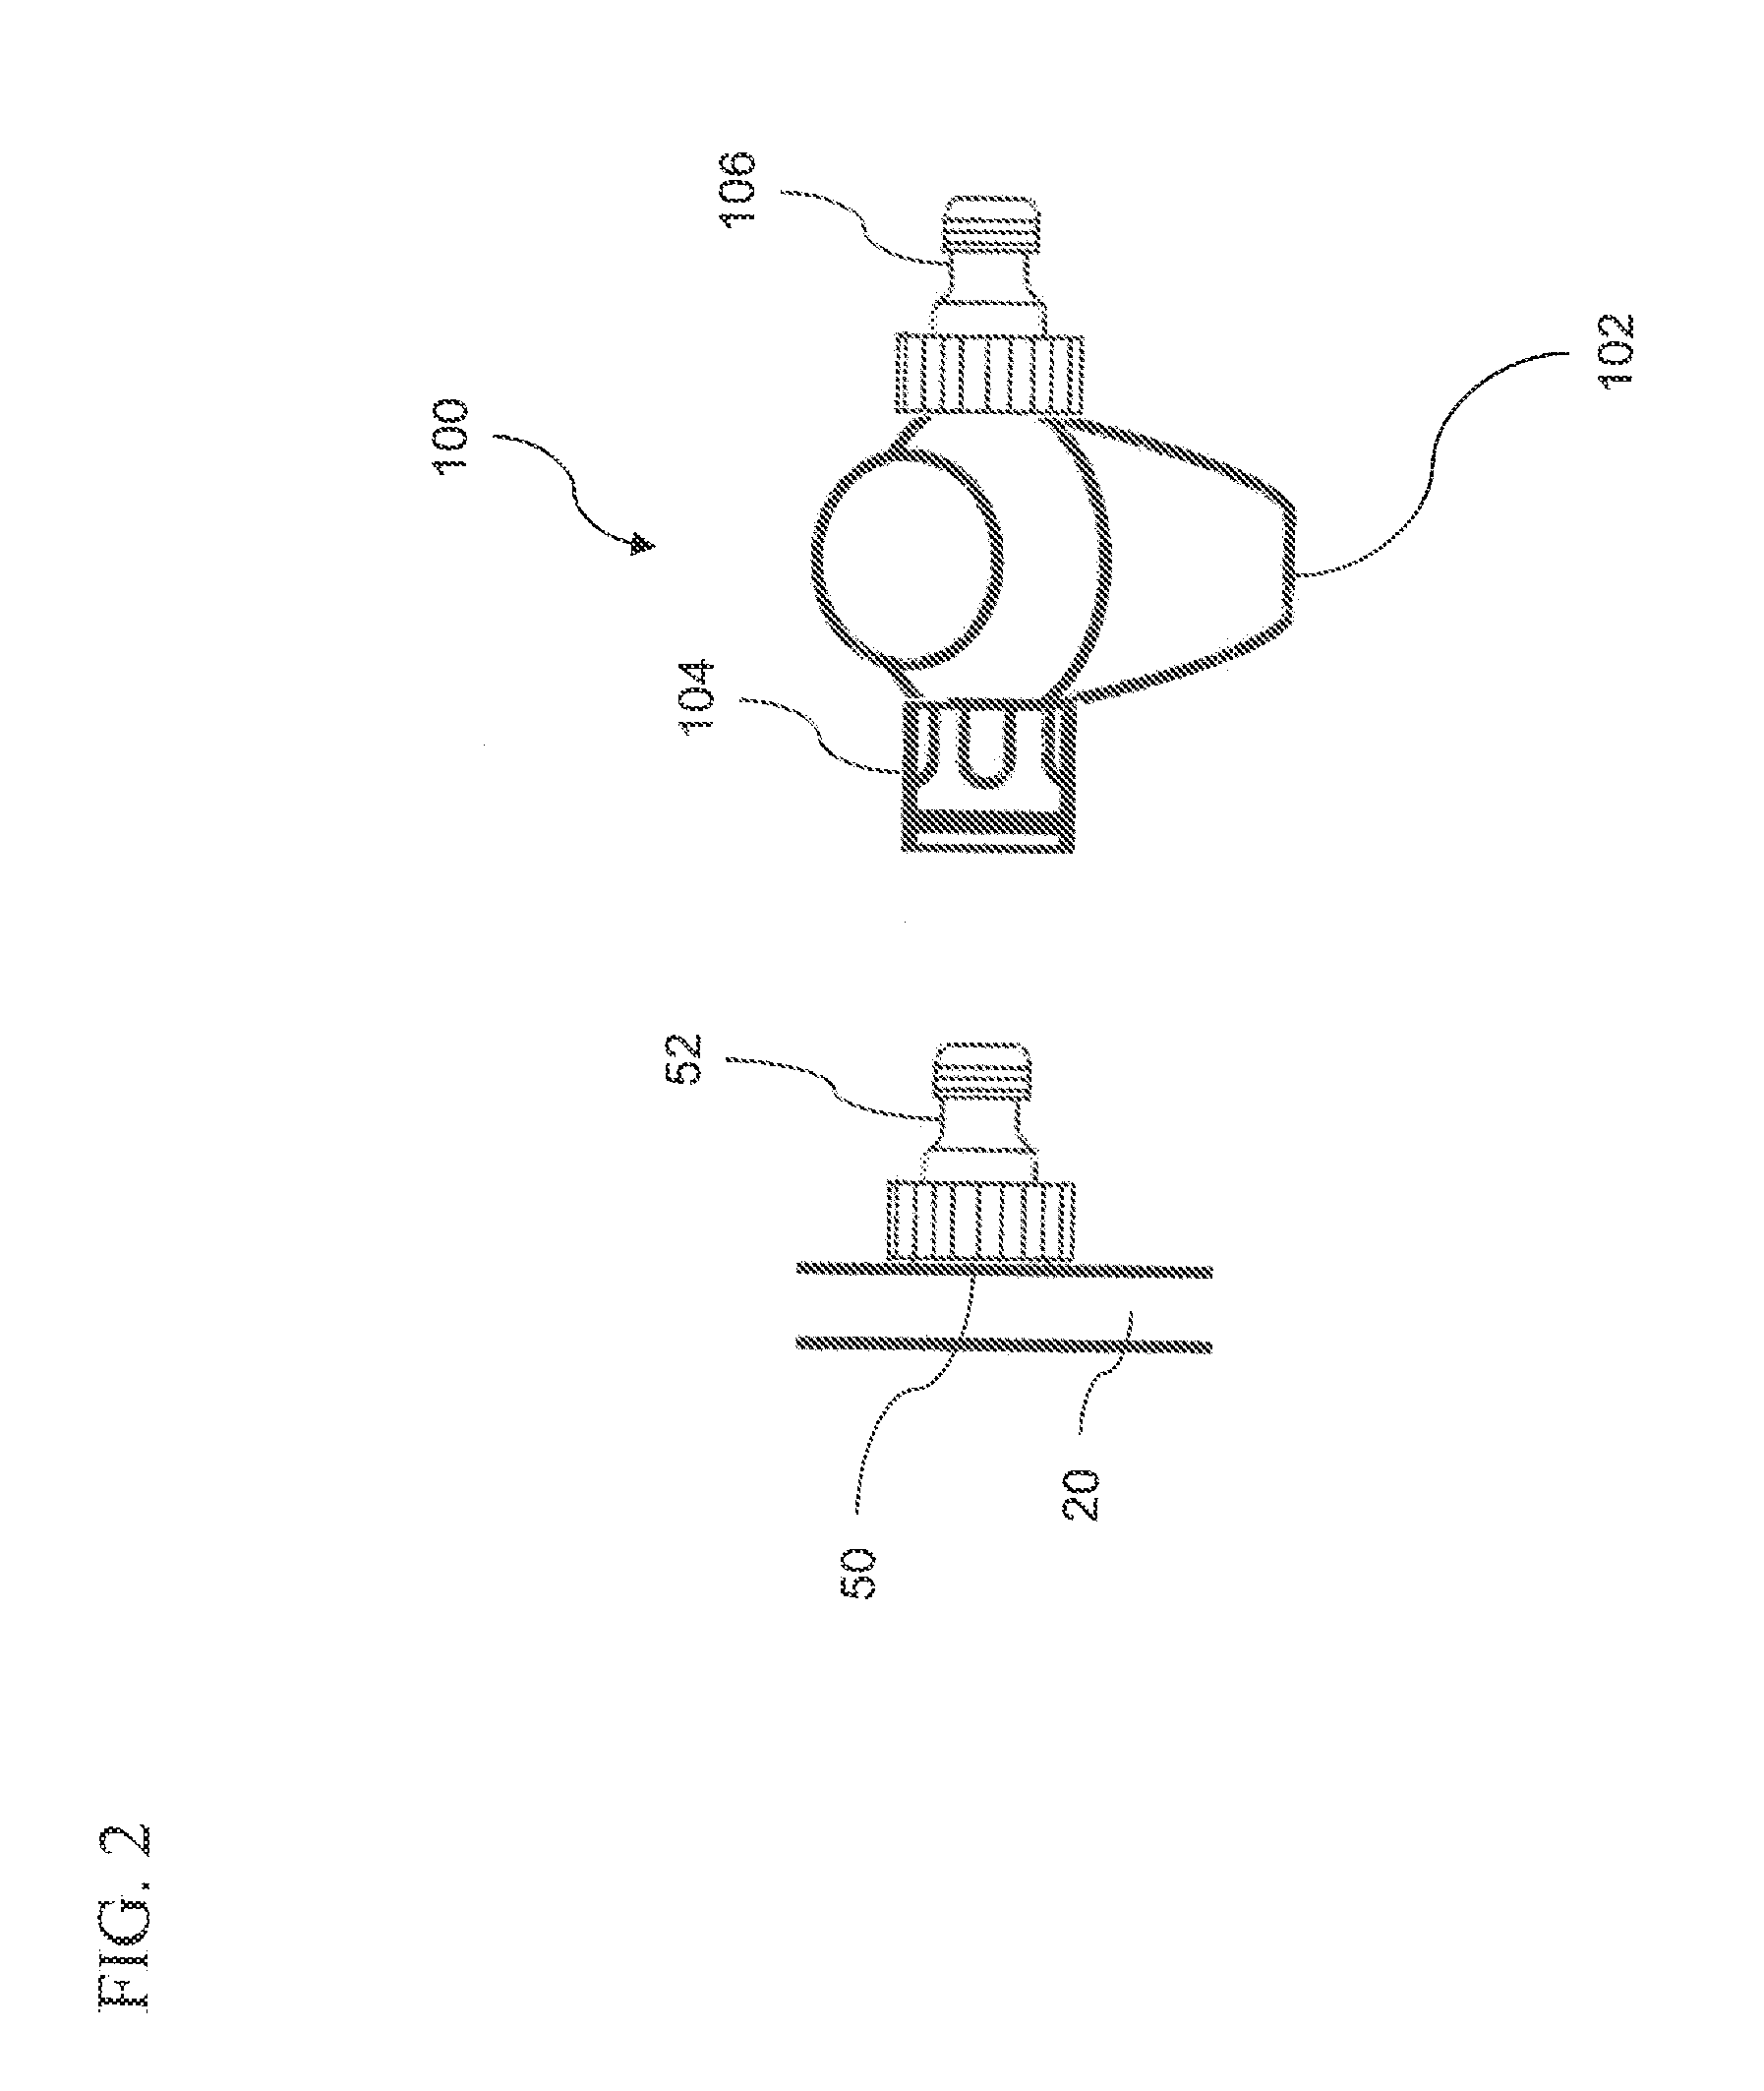 System and Method for Wetsuit Washing and Components Therefor